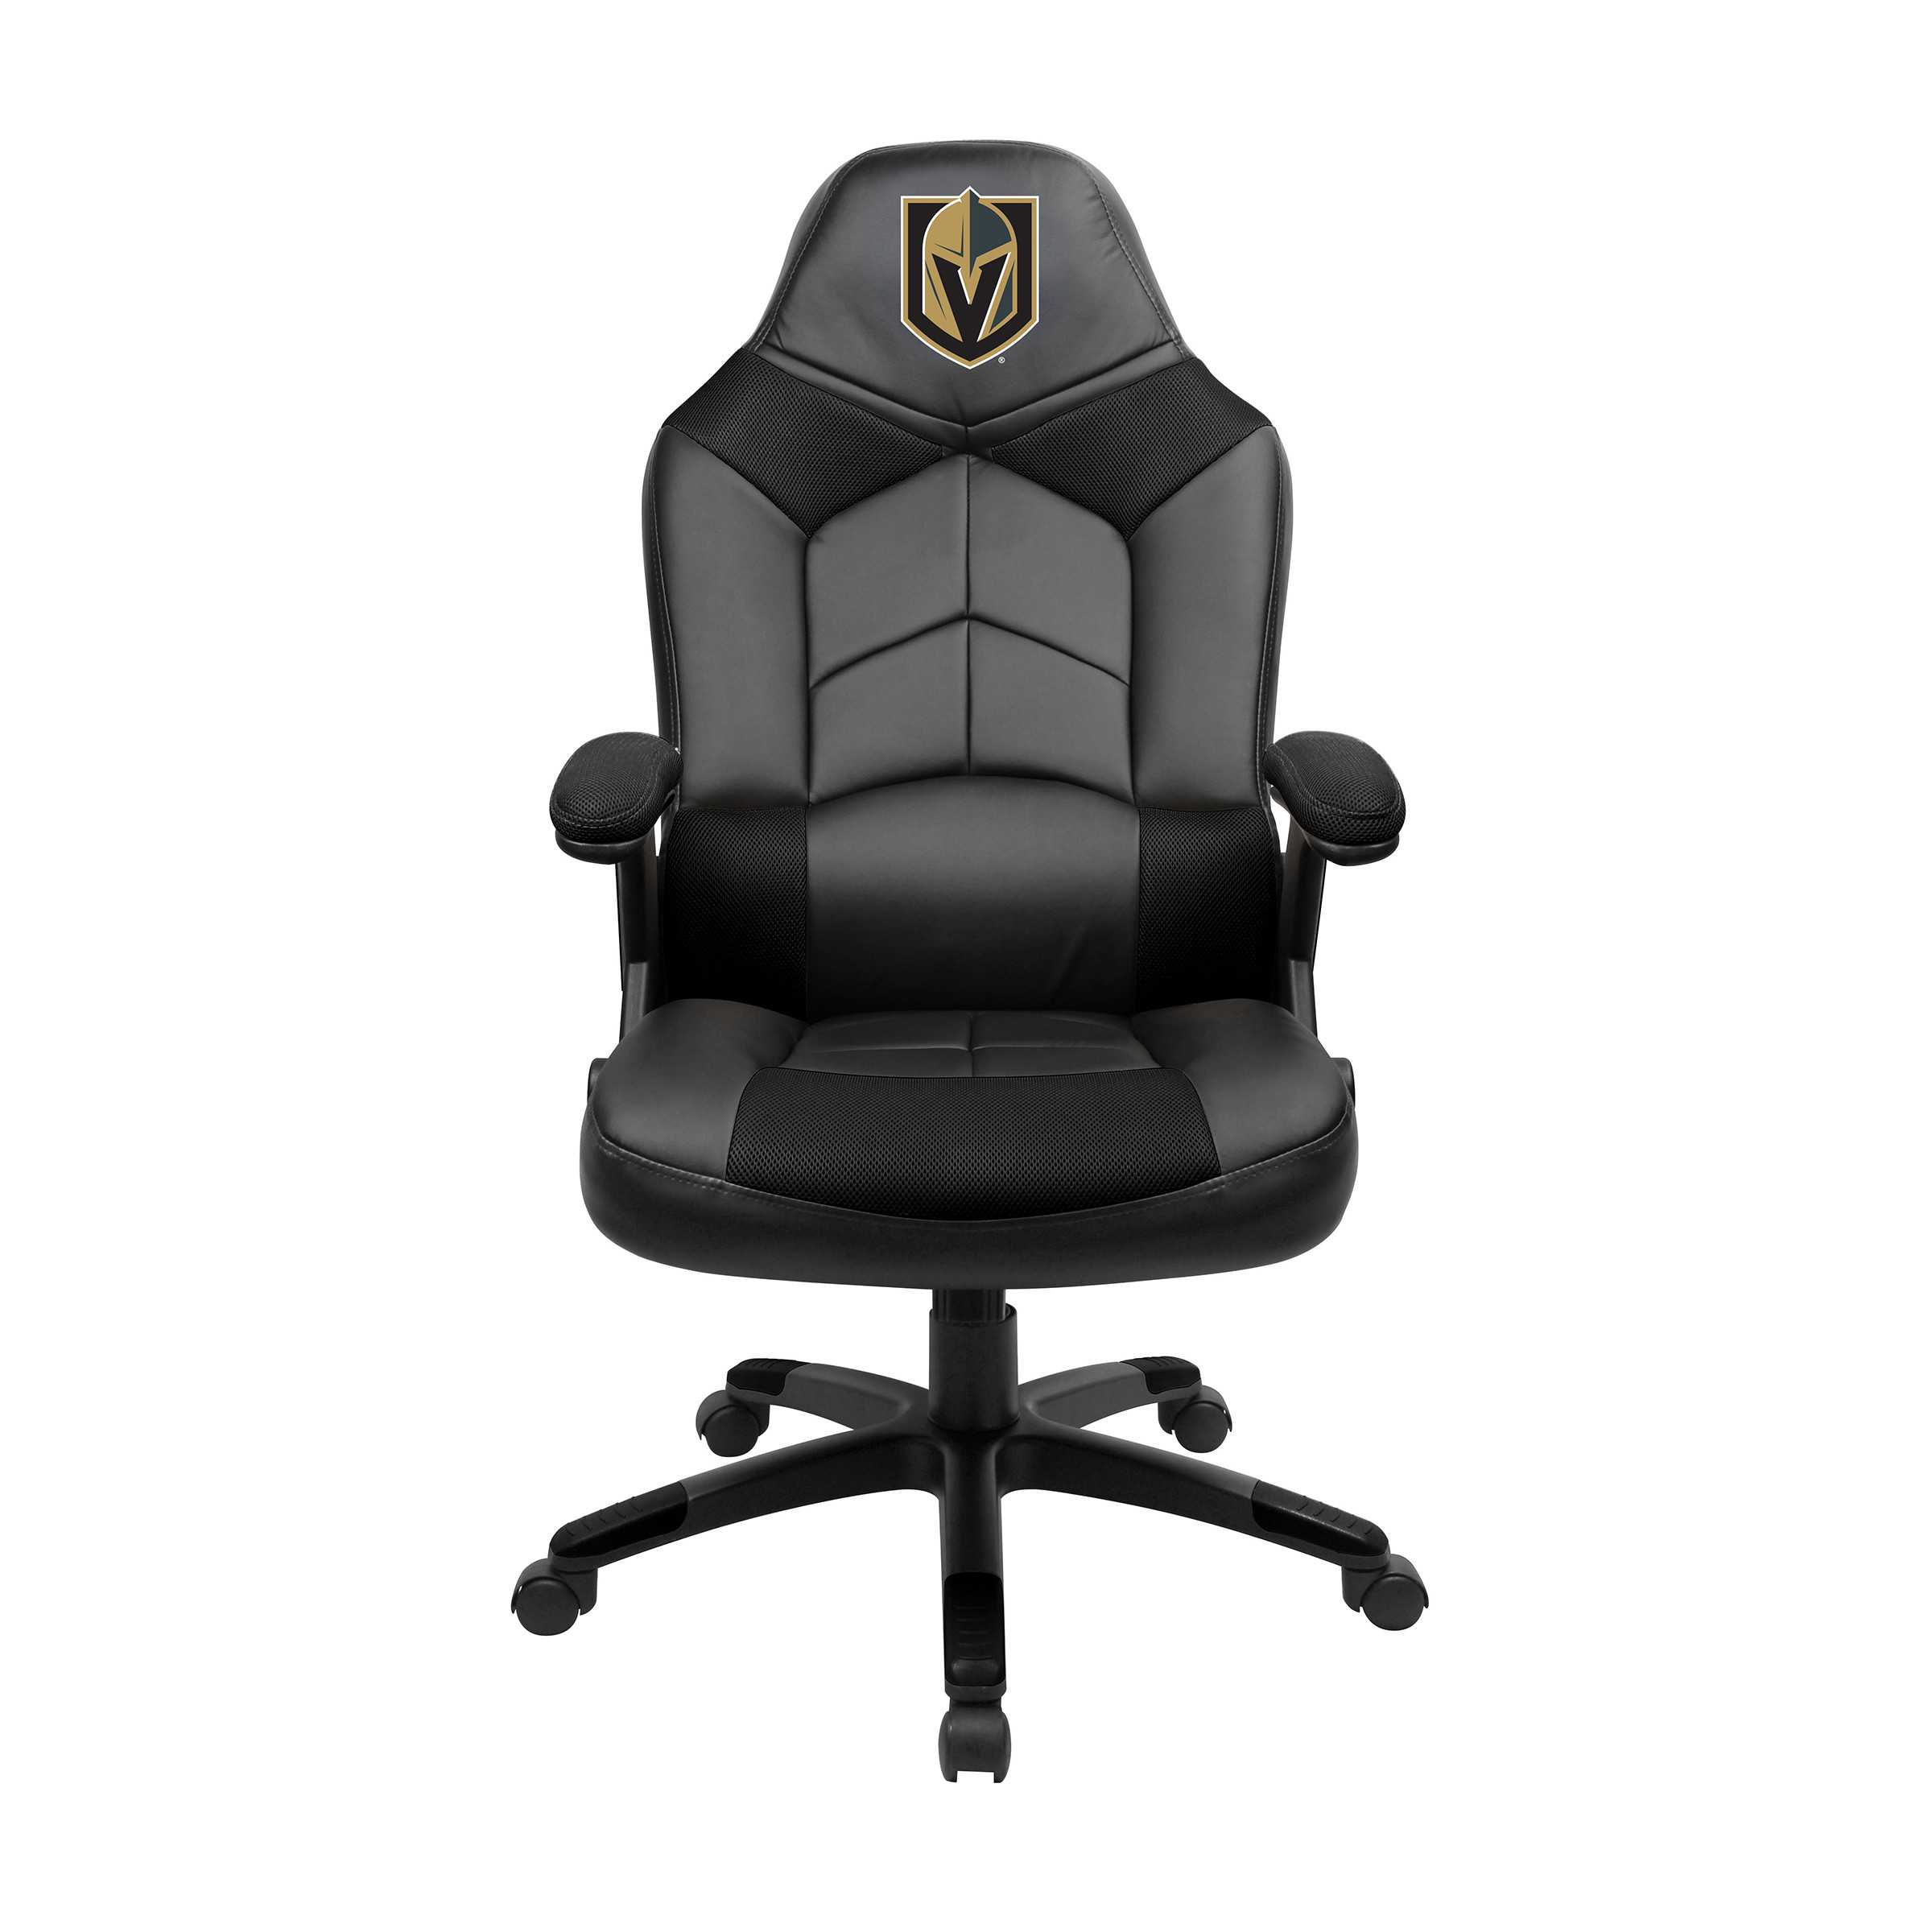 GOLDEN KNIGHTS OVERSIZED GAME CHAIR